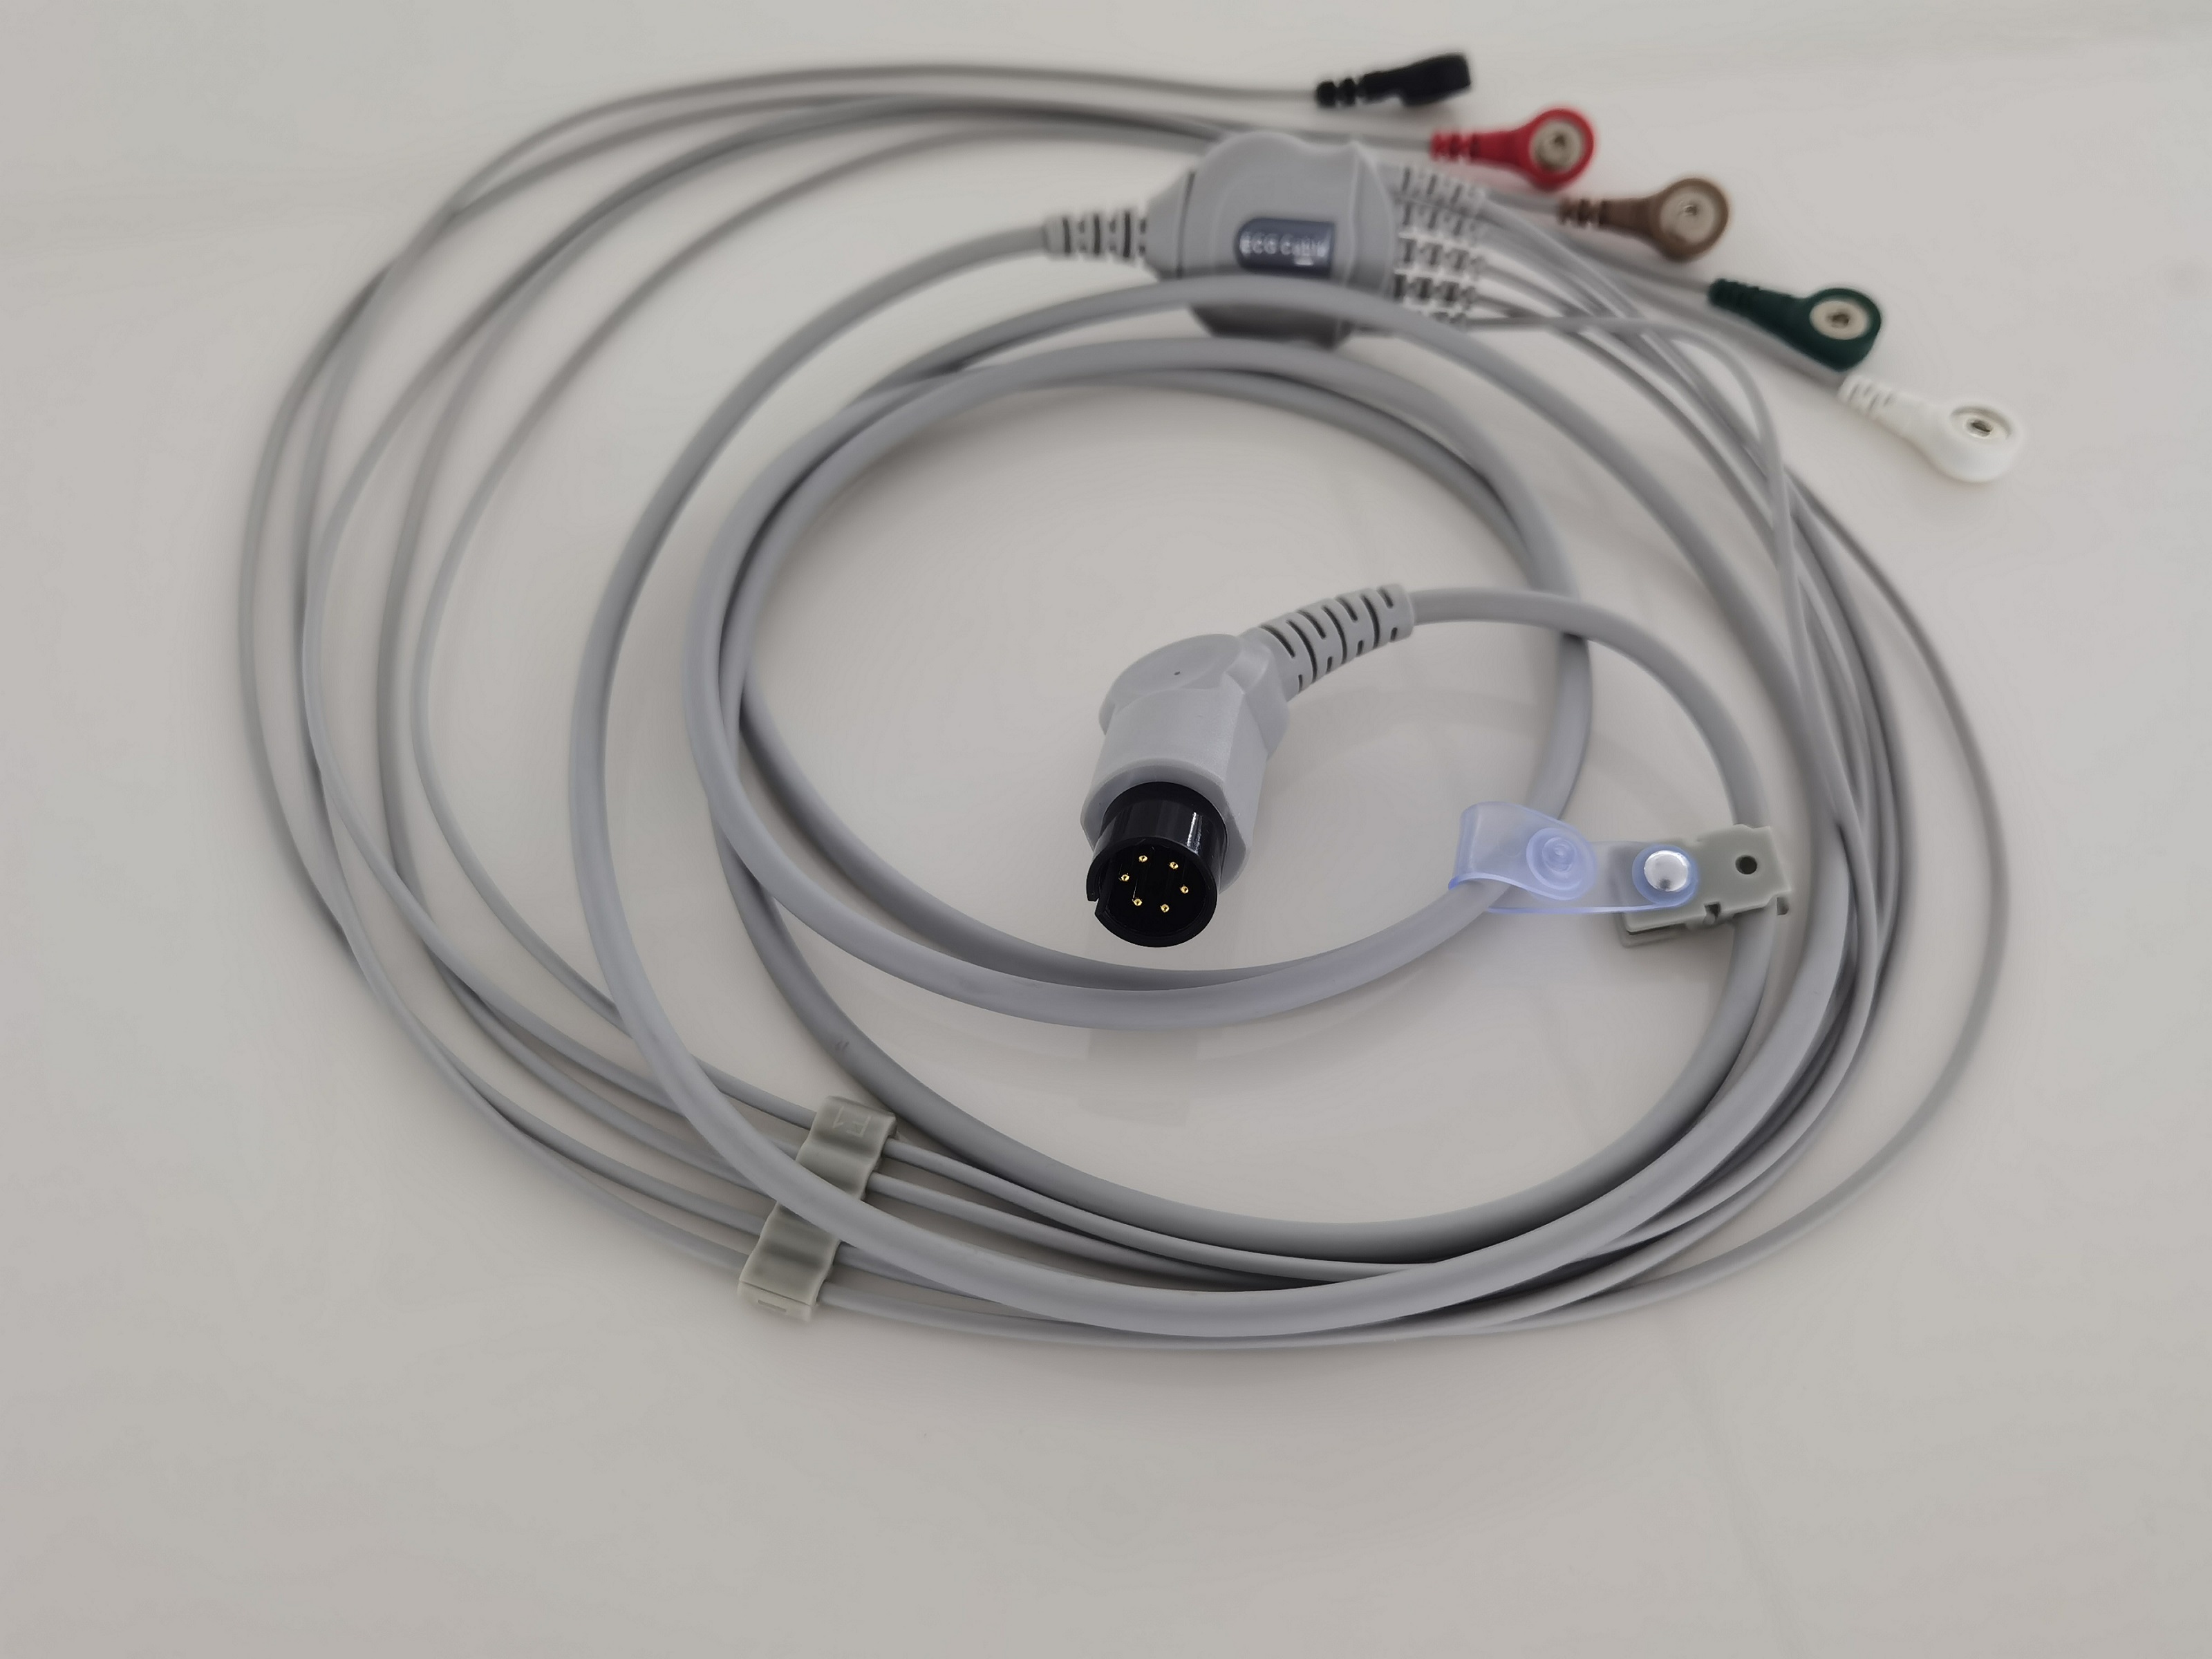 5-lead 12 and 15 lead system lead wires for medical ECG monitoring